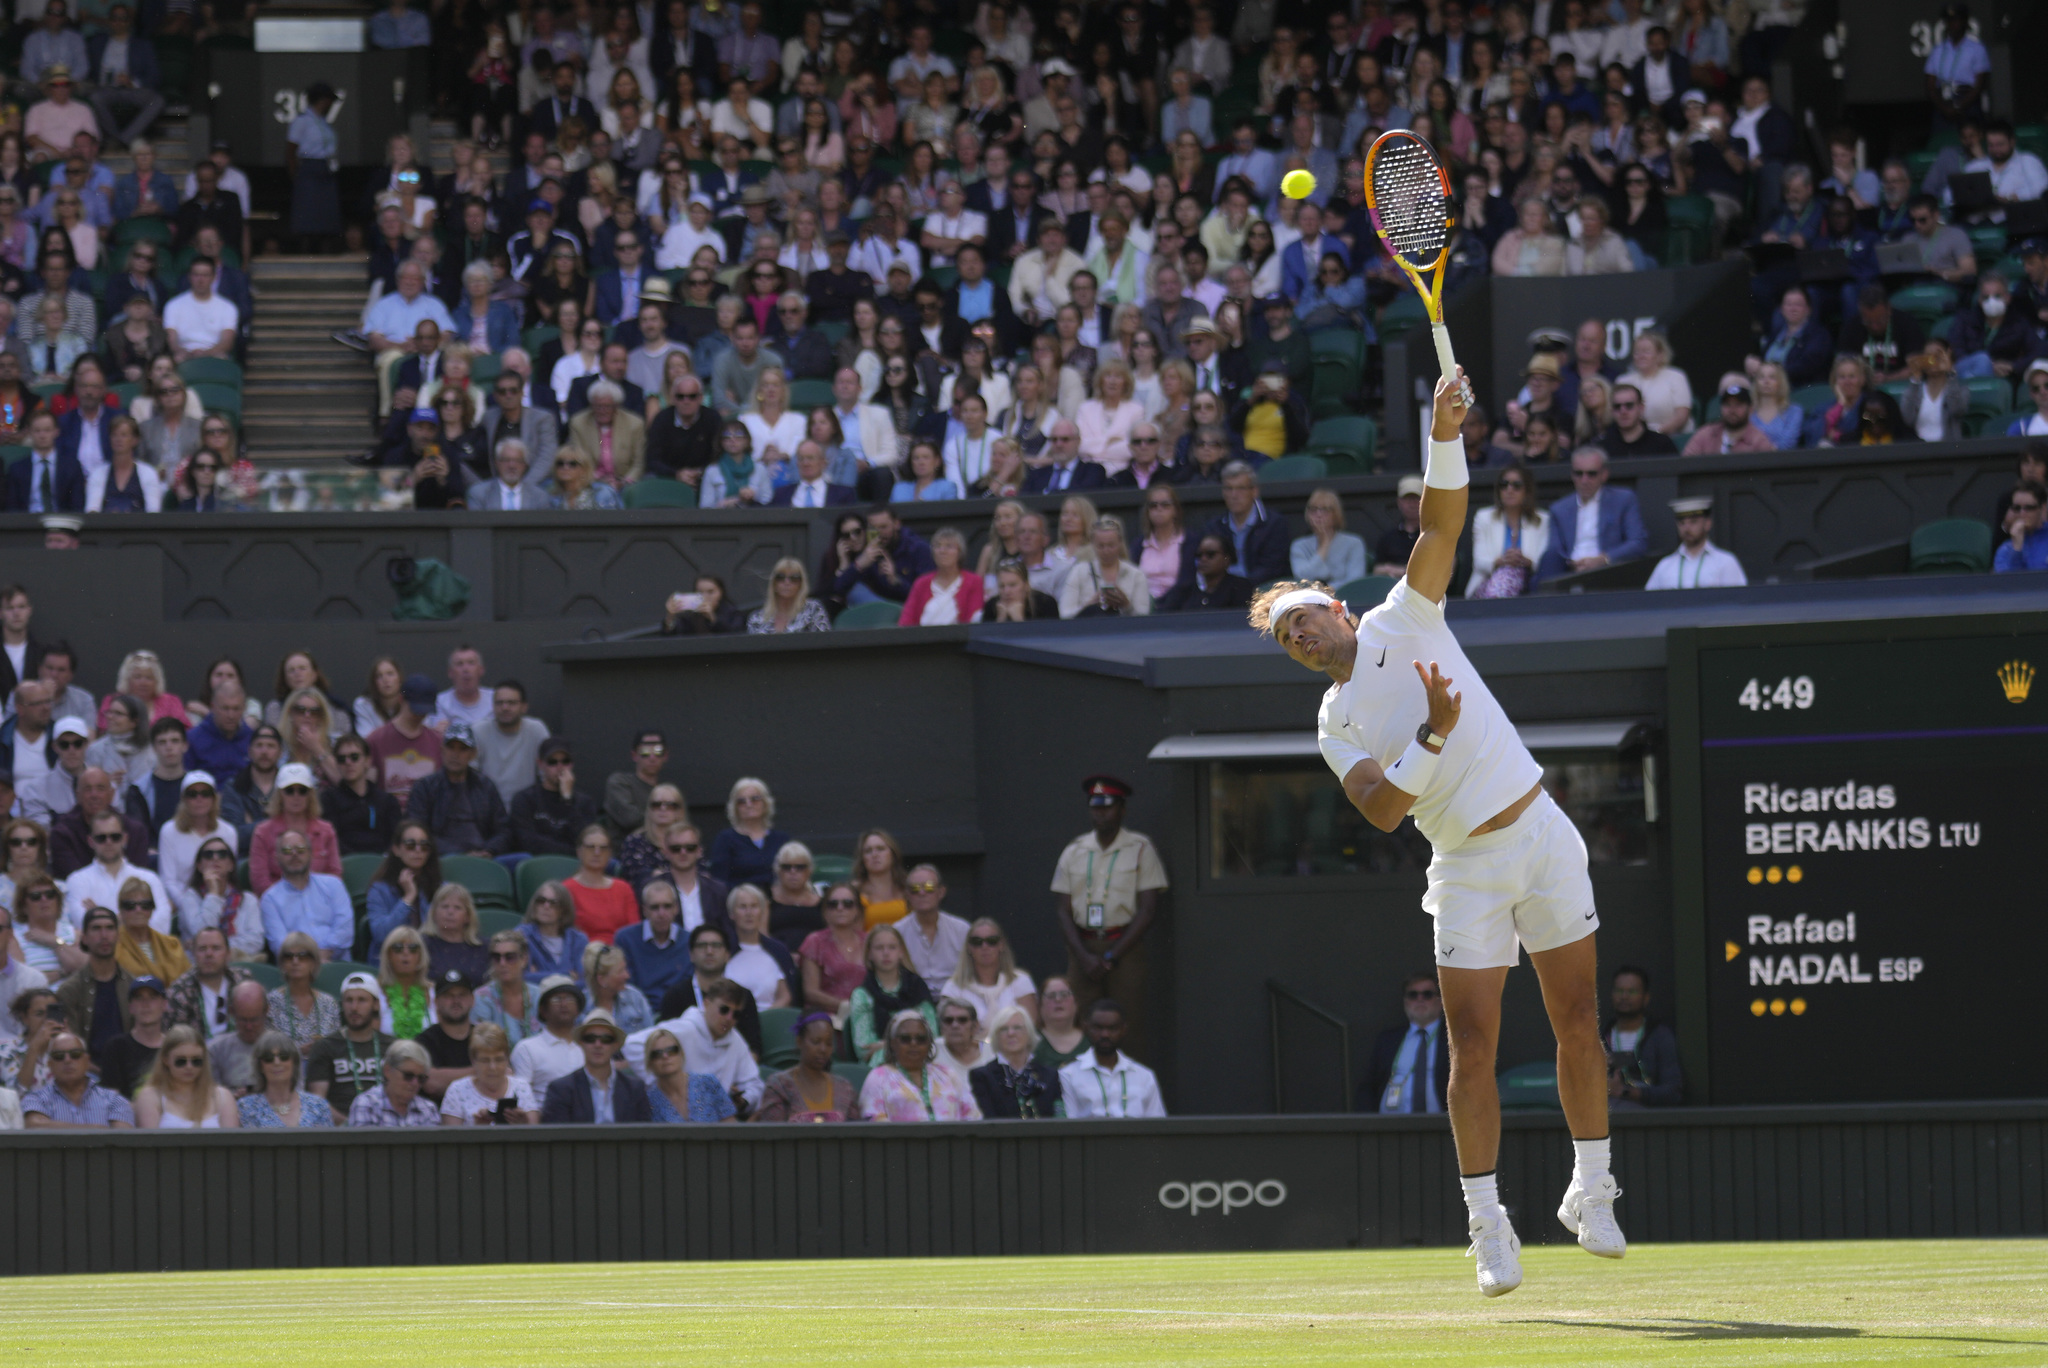 Spain's Rafael  lt;HIT gt;Nadal lt;/HIT gt; serves to Lithuania's Ricardas Berankis in a second round men's singles match on day four of the Wimbledon tennis championships in London, Thursday, June 30, 2022. (AP Photo/Kirsty Wigglesworth)